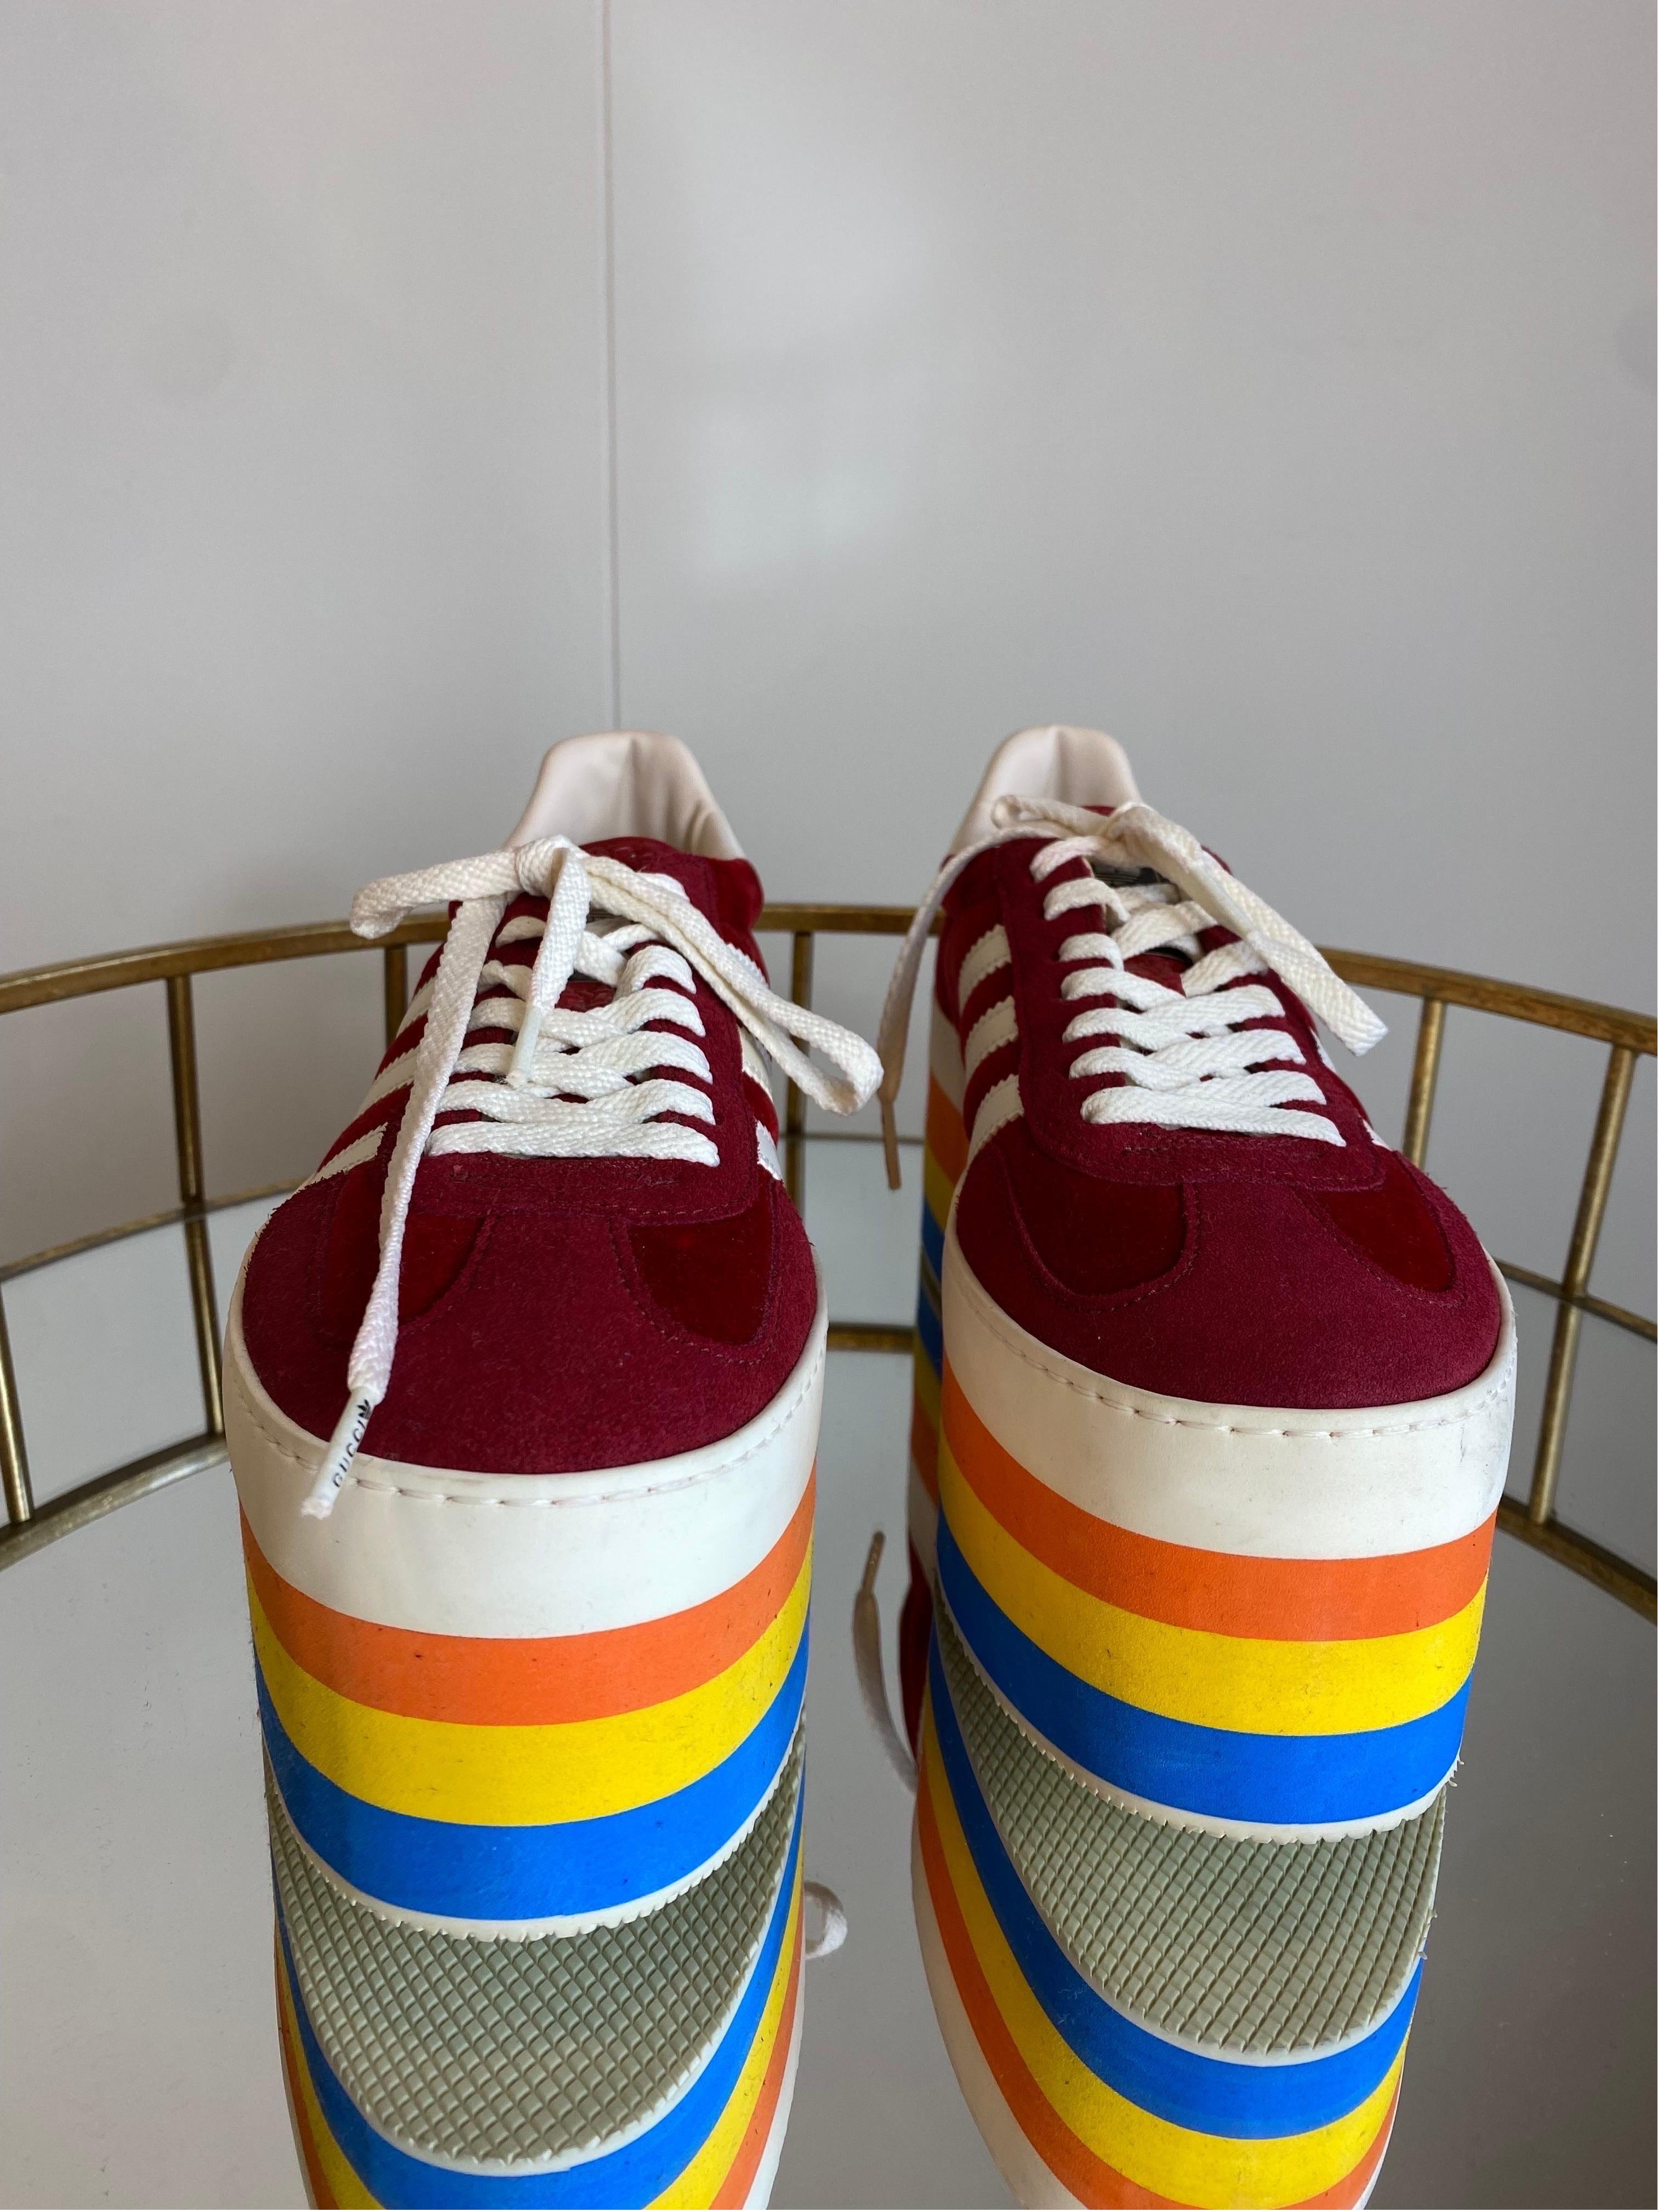 Adidas X Gucci Gazelle bordeaux and Rainbow sneakers In Excellent Condition For Sale In Carnate, IT